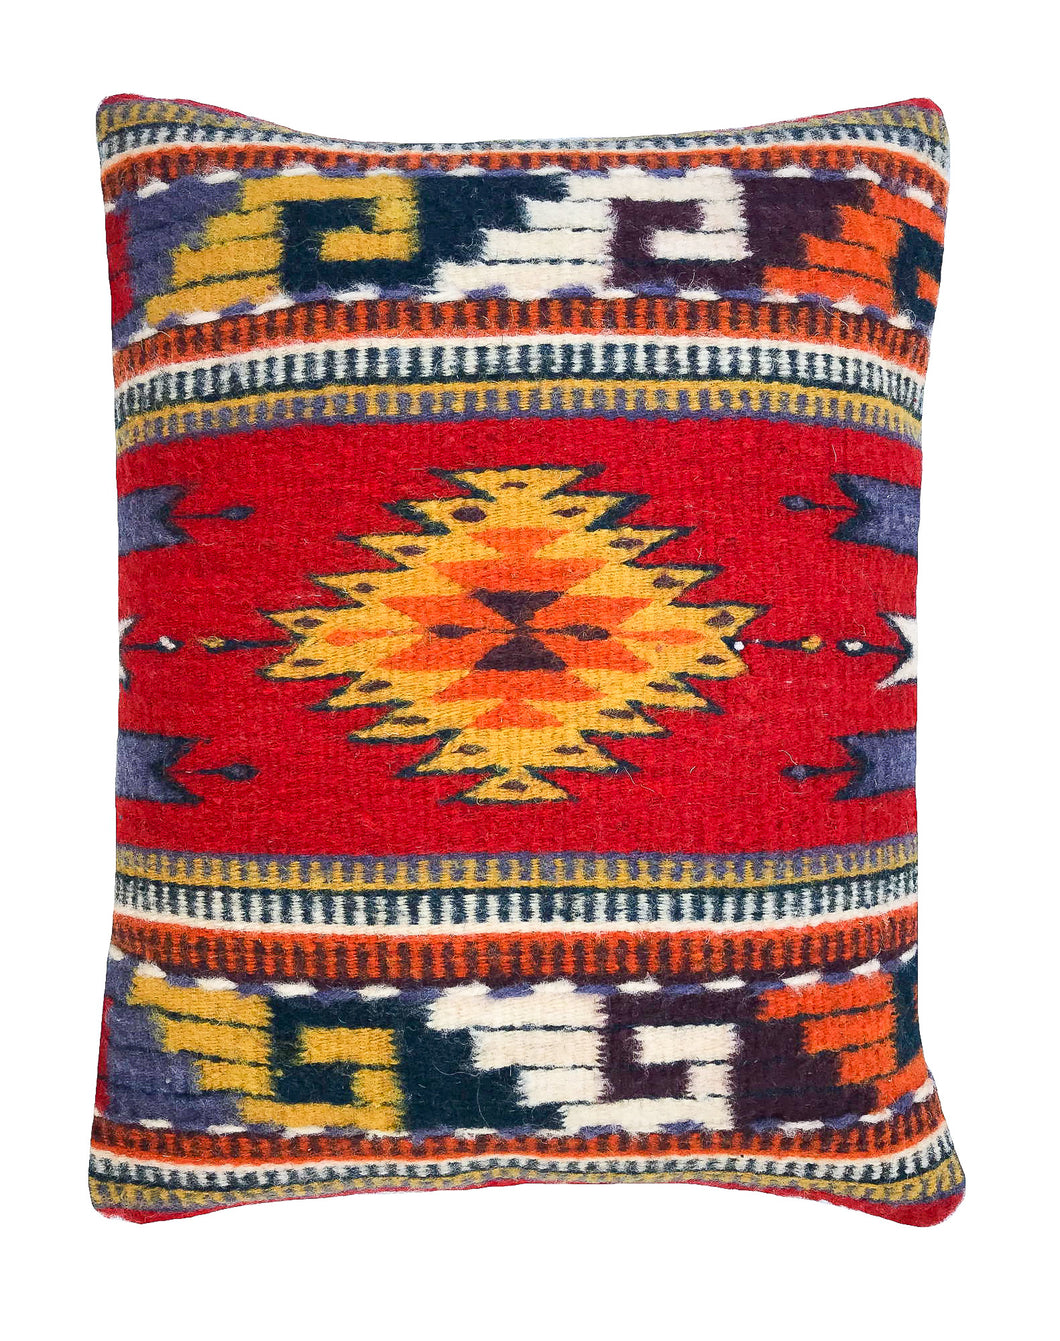 Handwoven Zapotec Indian Pillow - Ruby Bejeweled Wool Oaxacan Textile